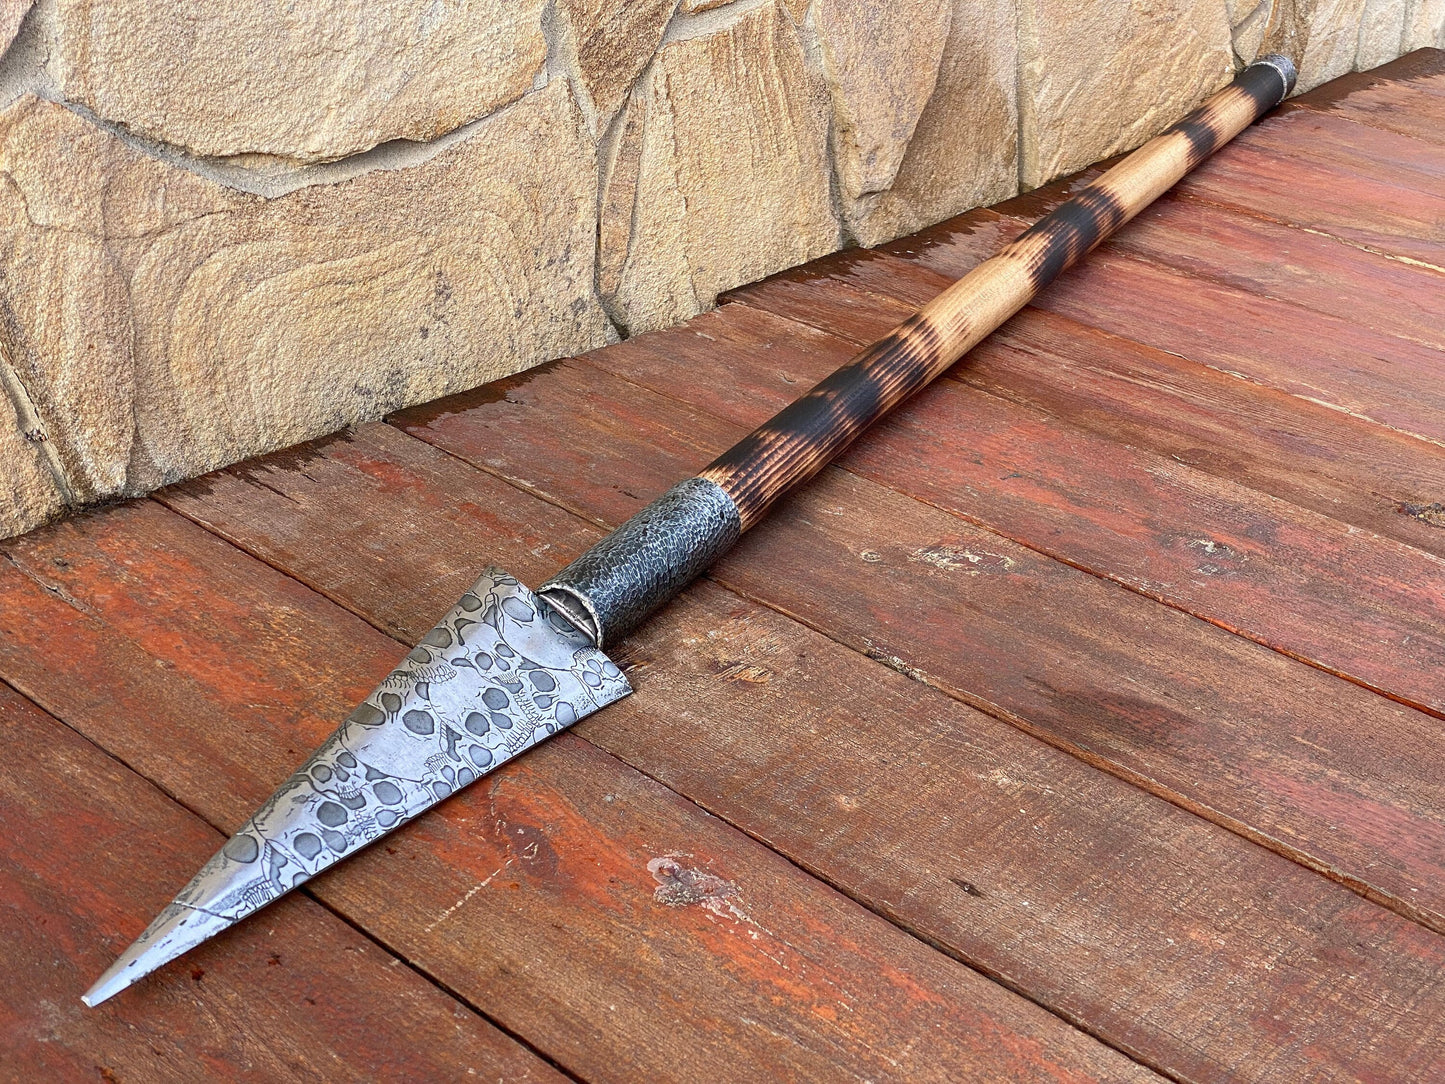 Spear, viking spear, skull, Halloween, medieval, birthday, castle, Middle Ages, Christmas,mens gift,steel gift,anniversary,personalized gift